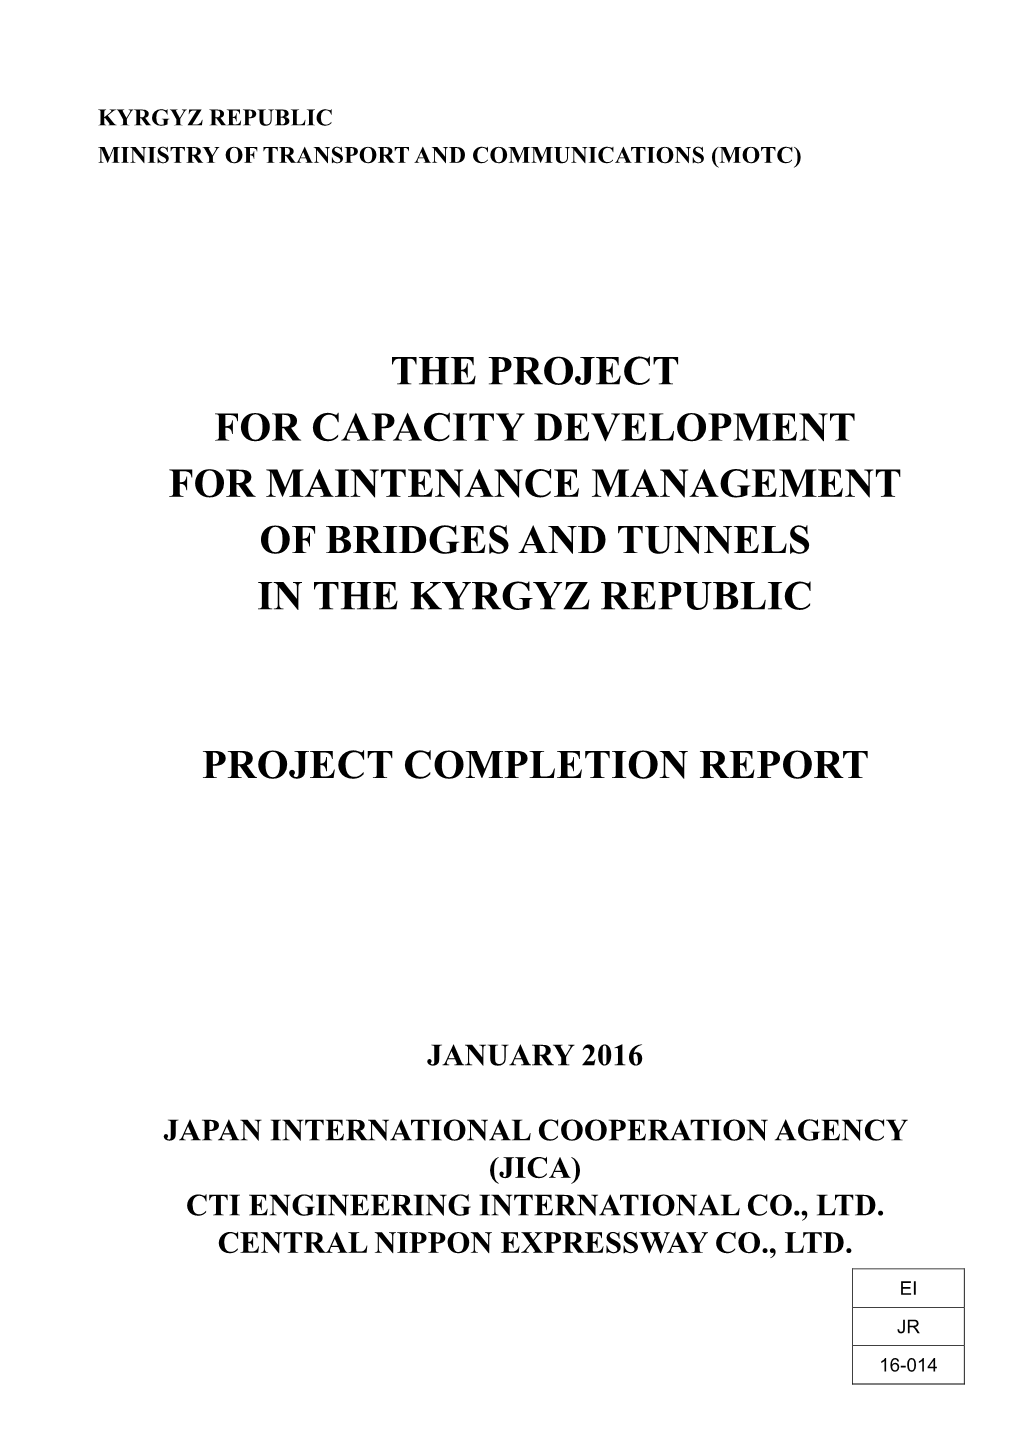 The Project for Capacity Development for Maintenance Management of Bridges and Tunnels in the Kyrgyz Republic Project Completion Report